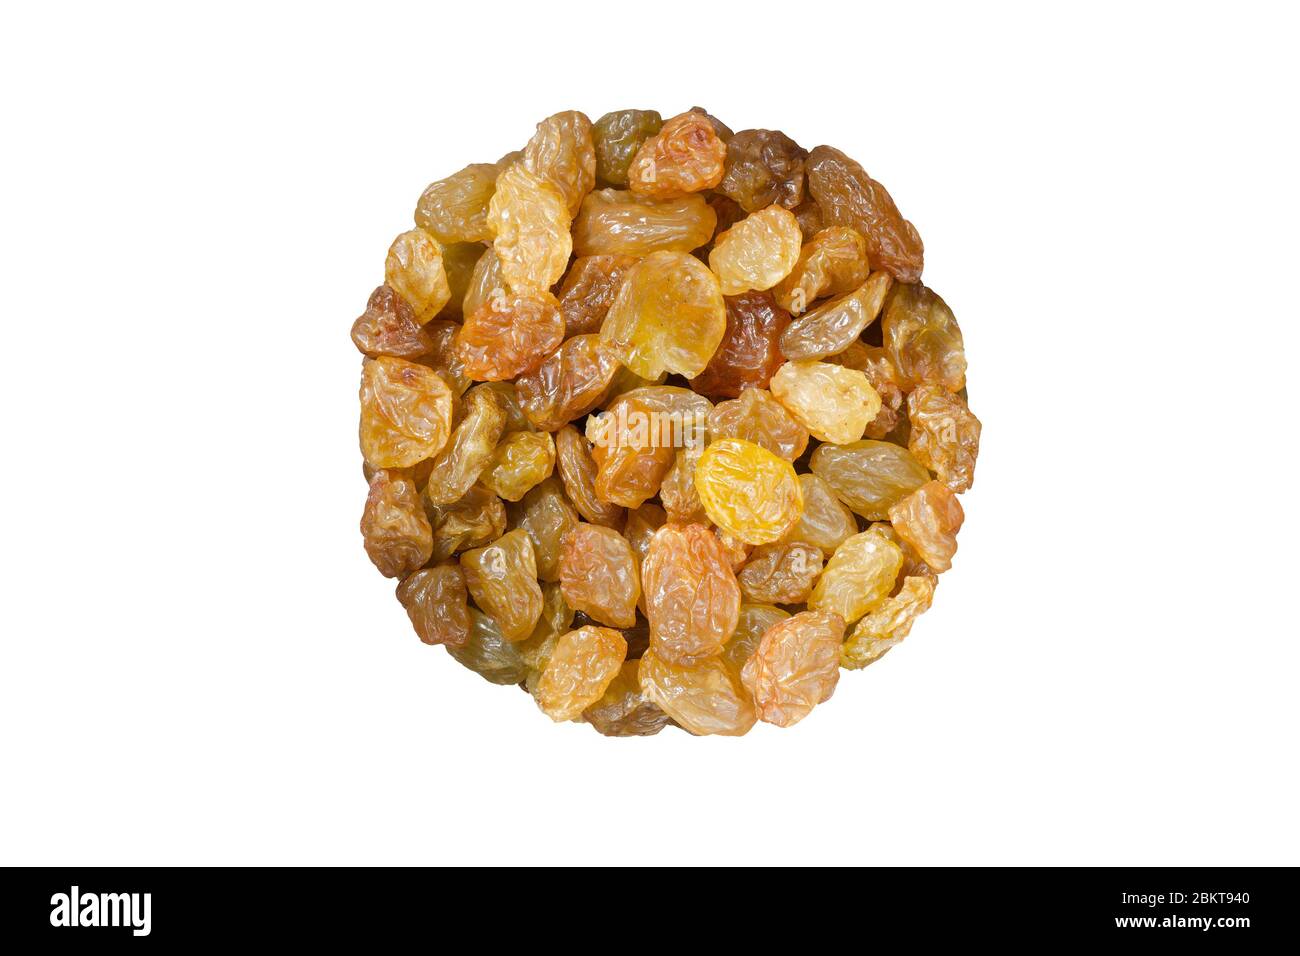 Brown dry raisins isolated on white background. Top view. Stock Photo